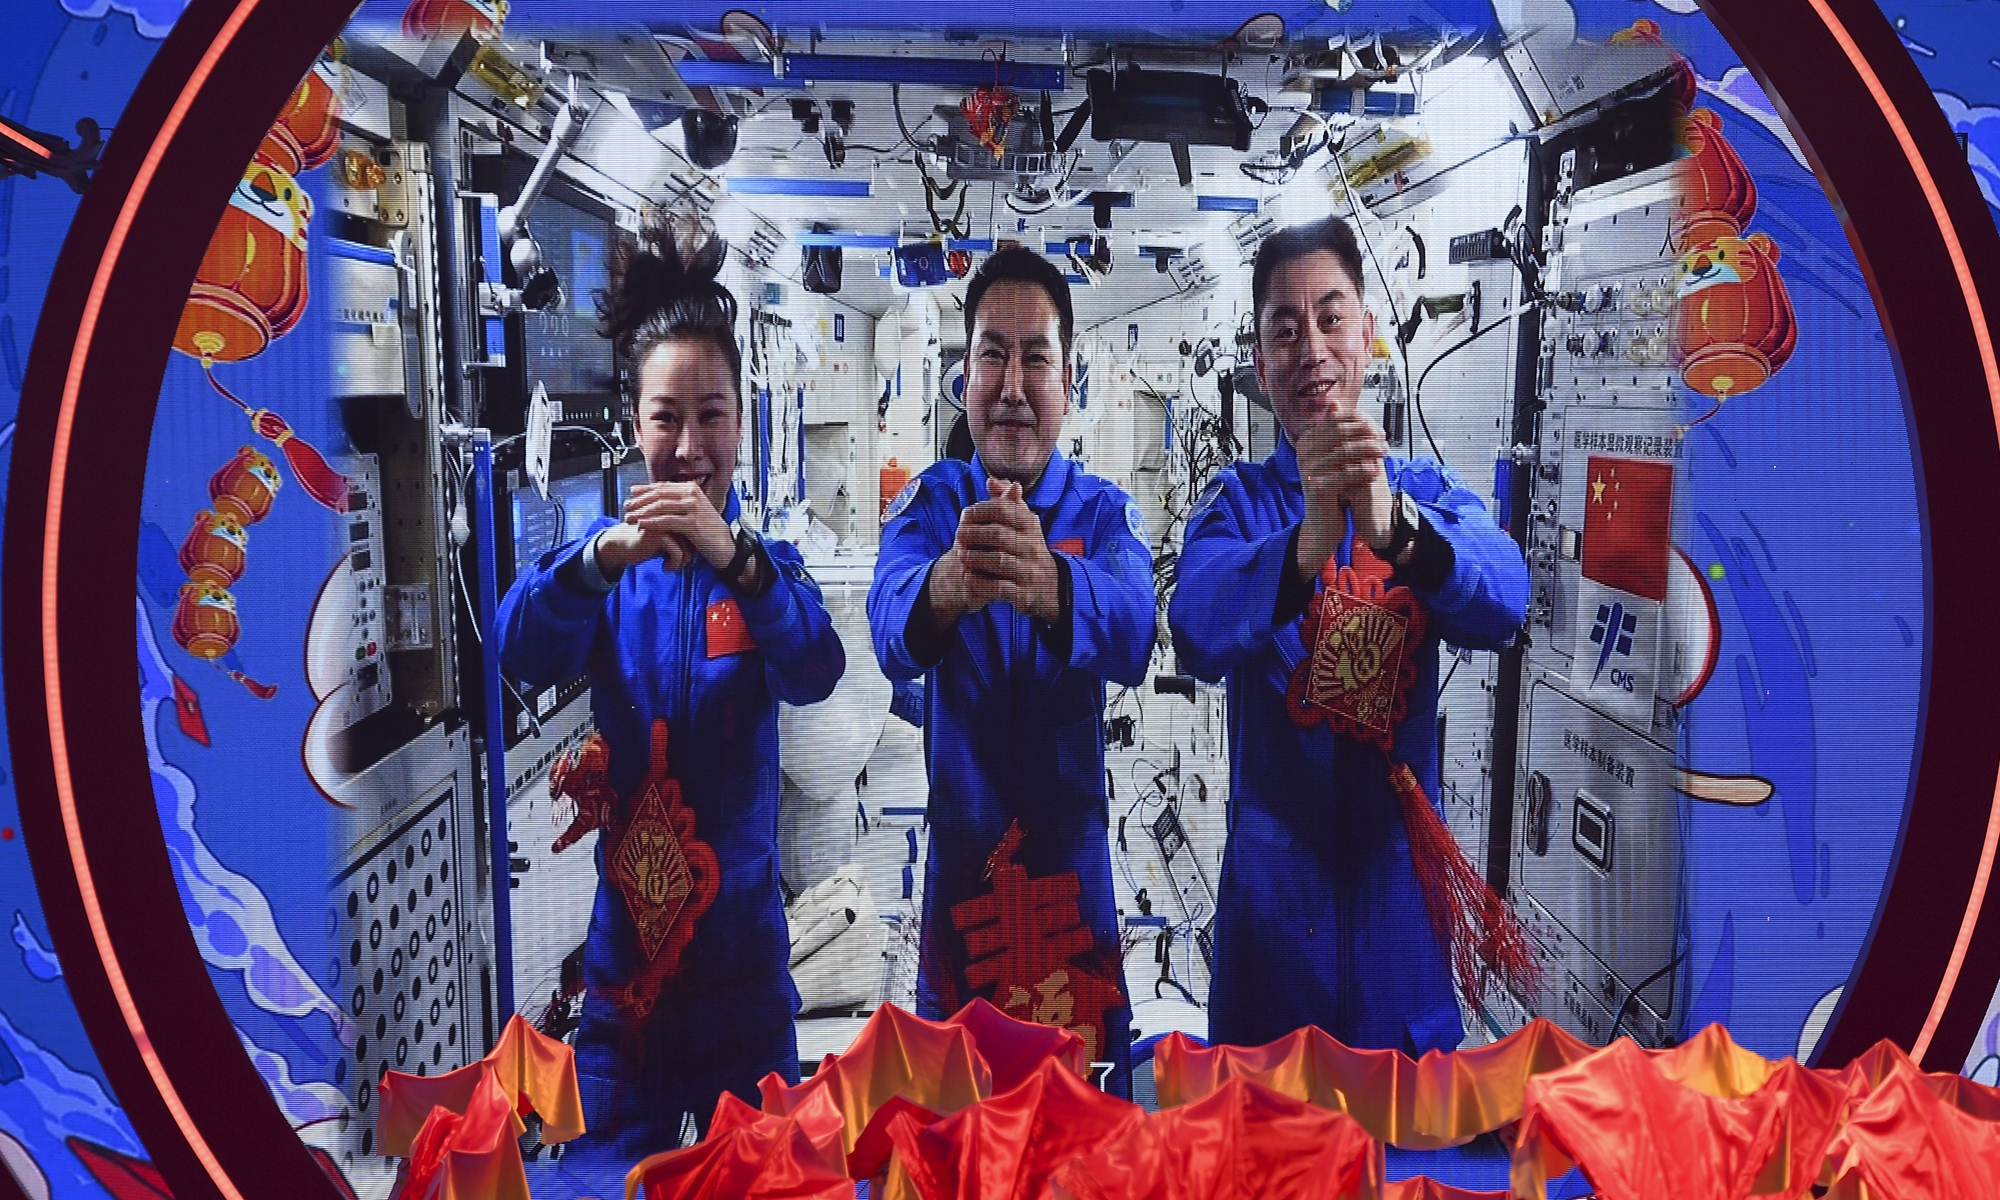 Shenzhou-13 taikonauts Zhai Zhigang, Wang Yaping and Ye Guangfu - who are living and working in the country's Tianhe space station core module - send blessings via video to all Chinese people around the world at a Chinese Lunar New Year gala held on January 22, 2022. Photo: cnsphoto

